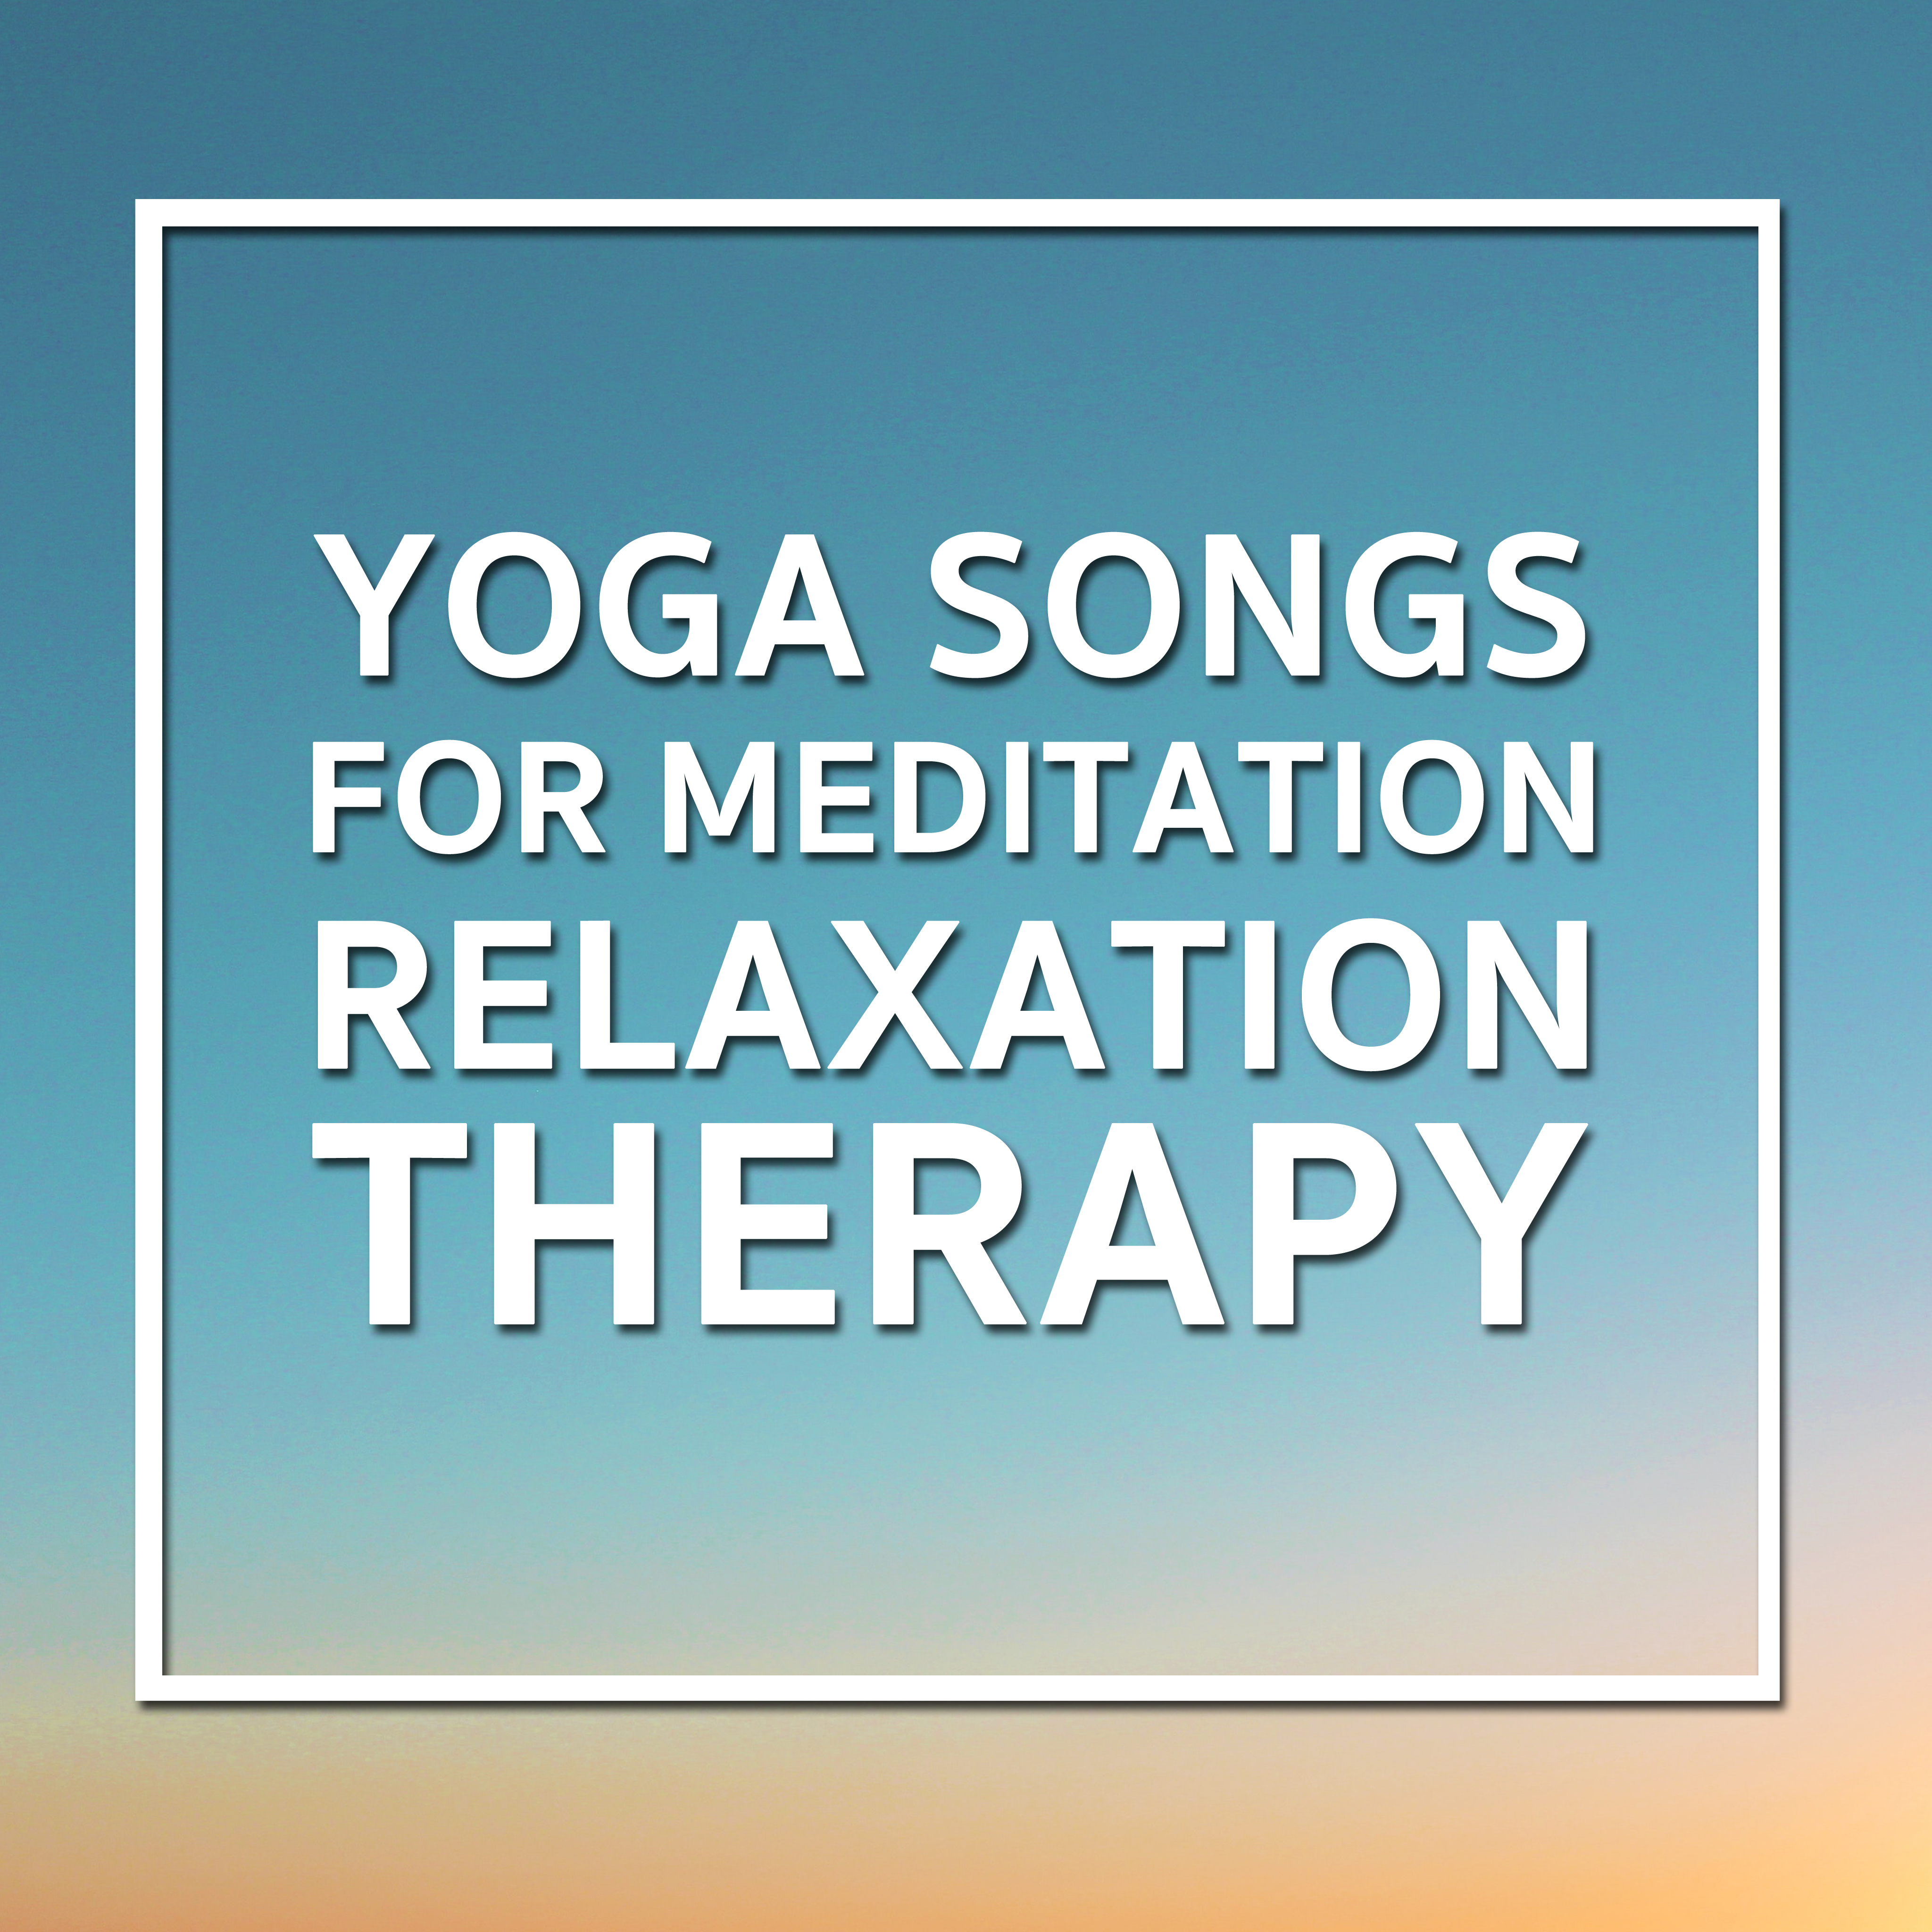 15 Yoga Songs for Meditation Relaxation Therapy